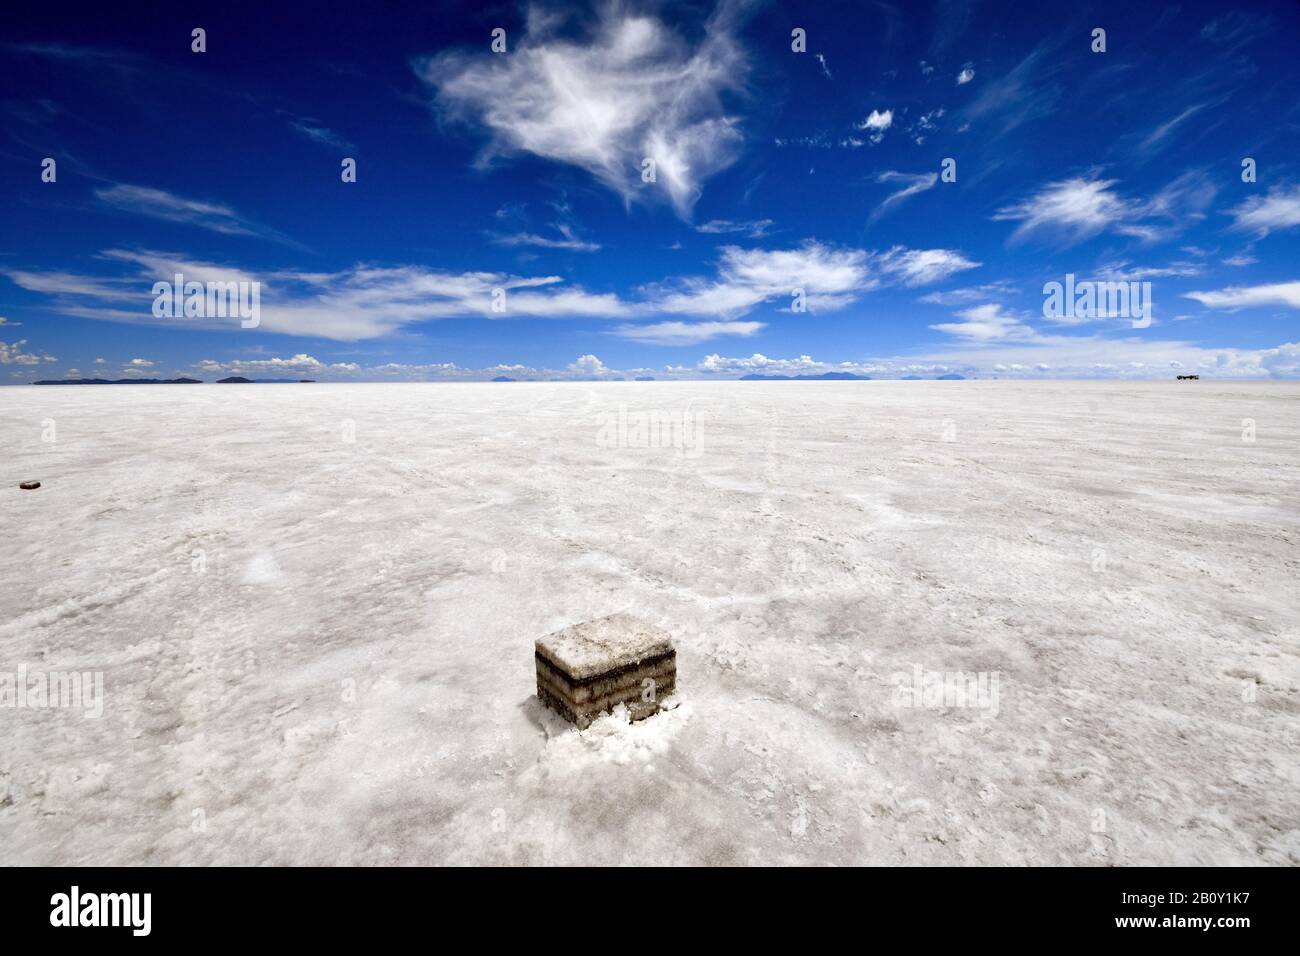 Potosi, Bolivia. 13th Feb, 2020. Bolivian Salar de Uyuni is the world's largest salt flat, and one of the top's bolivian touristic atraction, with 10,582 square kilometers (4,086 sq mi). It is in the province of PotosÃ- in southwest Bolivia, near the crest of the Andes at an elevation of 3,656 meters (11,995 ft) above sea level.The crust serves as a source of salt and covers a pool of brine, which is exceptionally rich in lithium. It contains approximatively 50% to 70% of the world's known lithium reserves. However, lithium extraction in the 1980s and 1990s by foreign companies met strong o Stock Photo